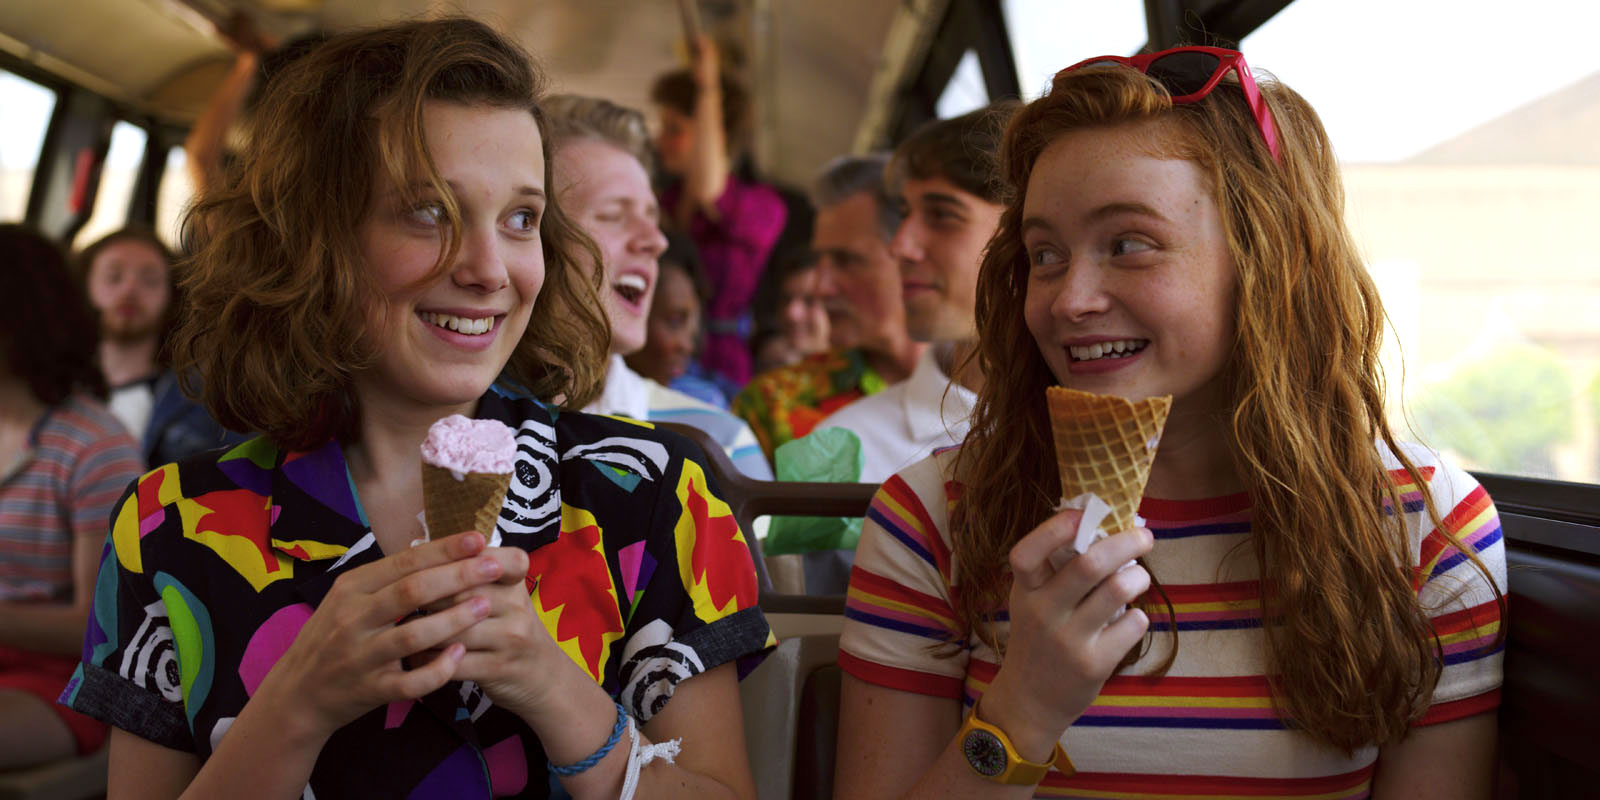 🍨 Order a Mega Sundae at Scoops Ahoy and We’ll Reveal Which “Stranger Things” Character You Are Stranger Things Season 3